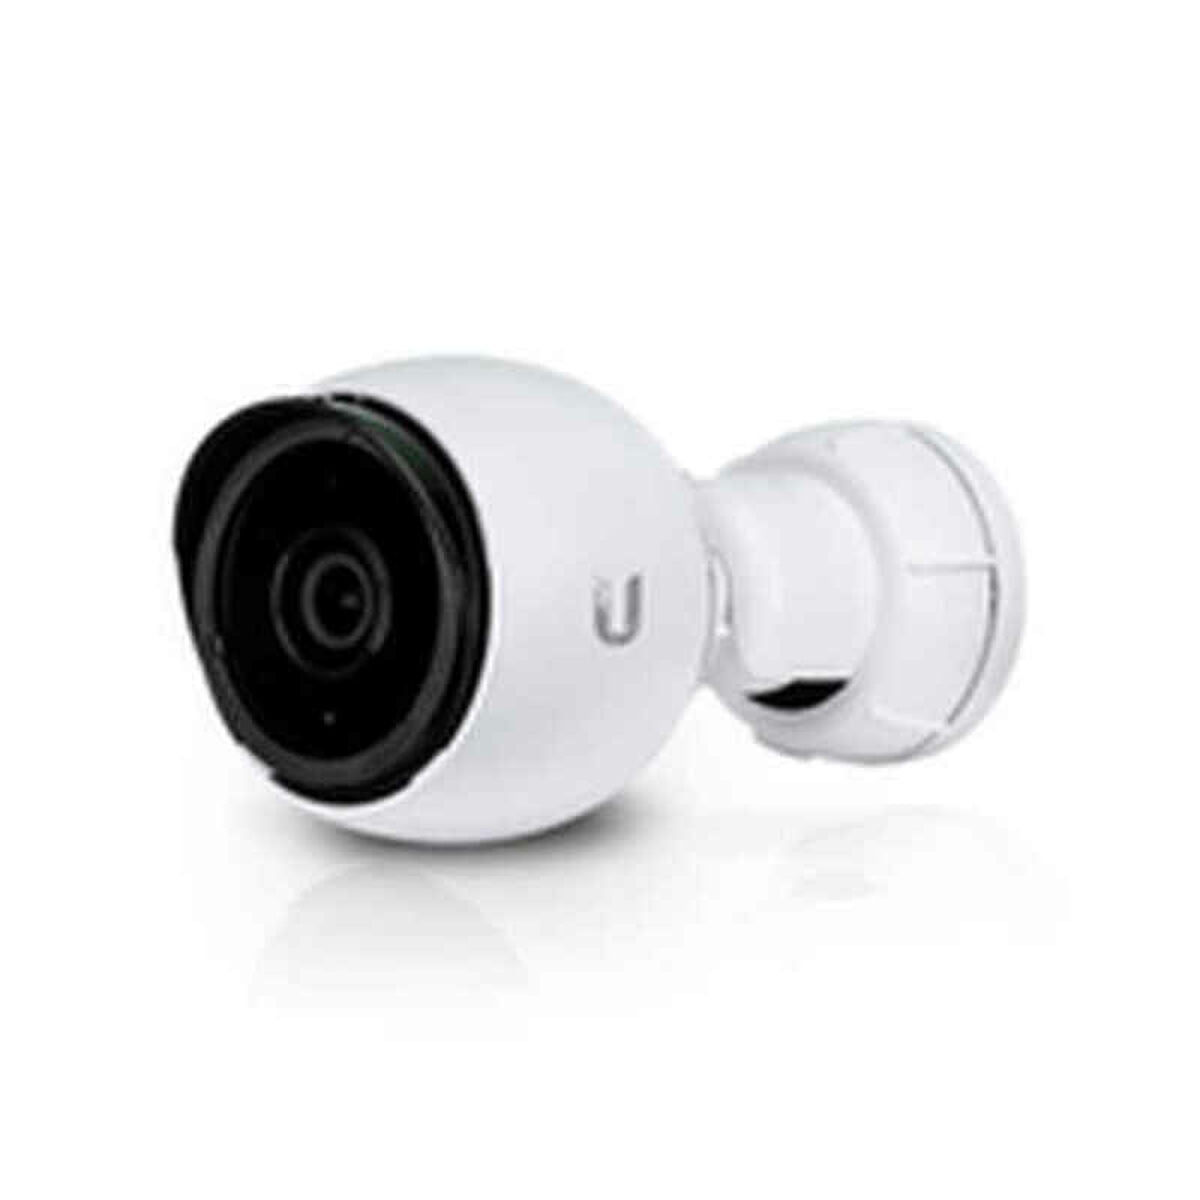 Surveillance Camcorder UBIQUITI UVC-G4-BULLET, UBIQUITI, DIY and tools, Prevention and safety, surveillance-camcorder-ubiquiti-uvc-g4-bullet, Brand_UBIQUITI, category-reference-2399, category-reference-2471, category-reference-3209, category-reference-t-15436, category-reference-t-15495, category-reference-t-19651, category-reference-t-21086, category-reference-t-25211, category-reference-t-29099, Condition_NEW, ferretería, Price_100 - 200, RiotNook